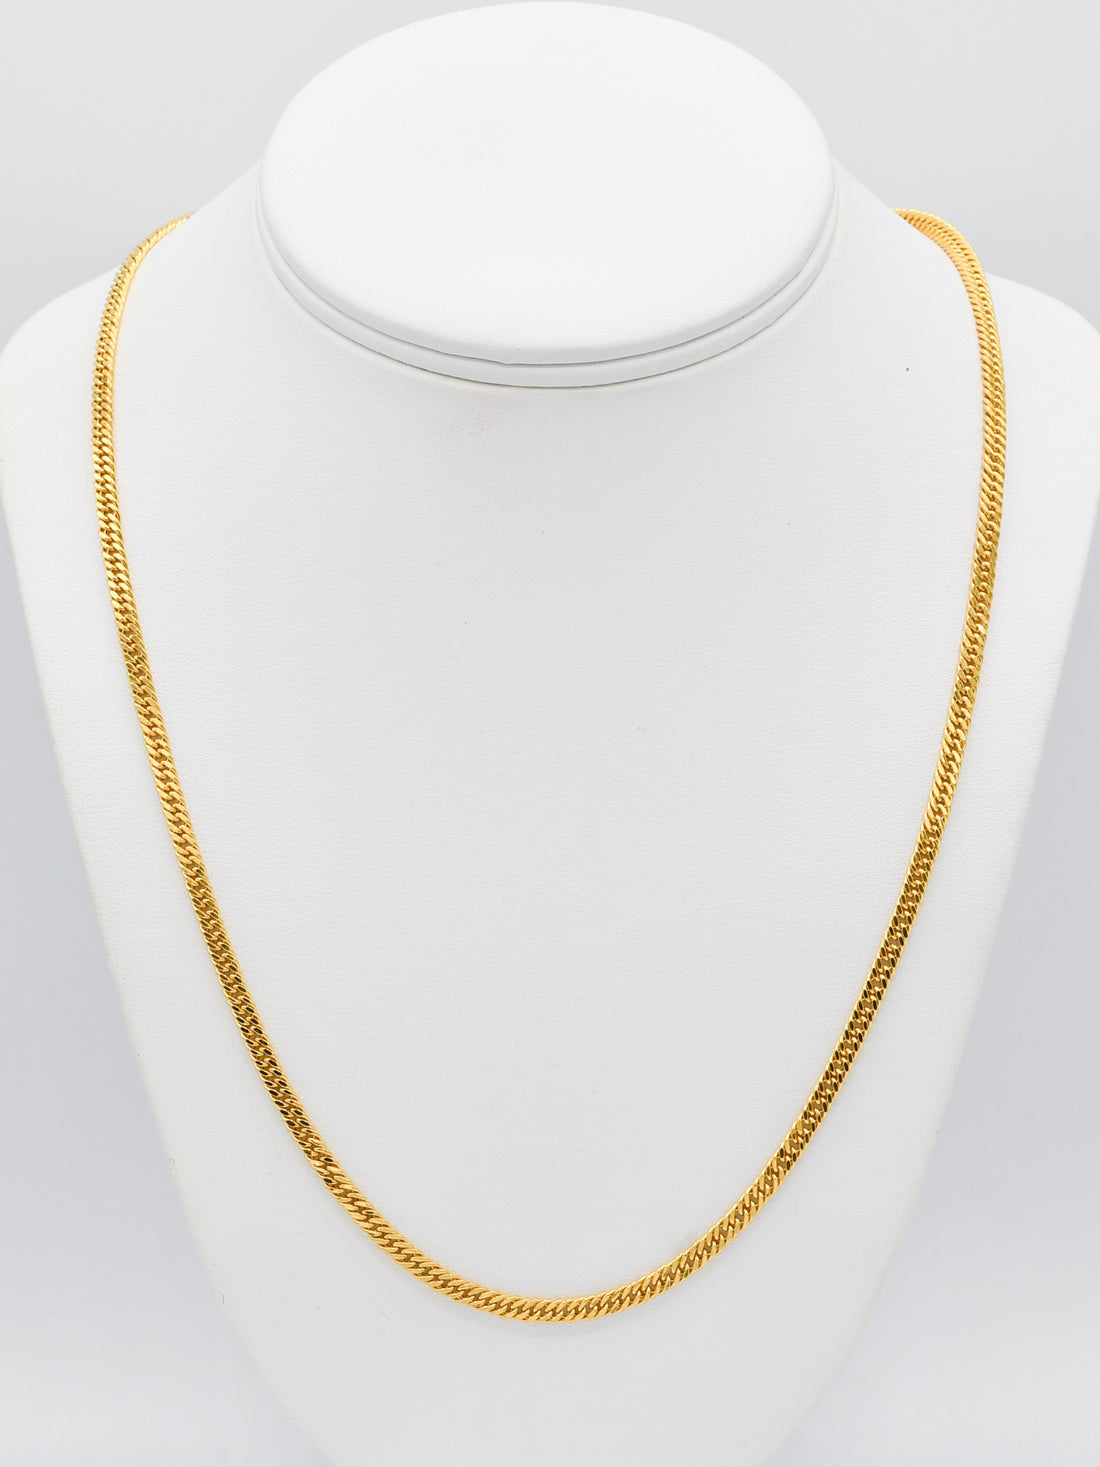 22ct Gold Hollow Curb Chain